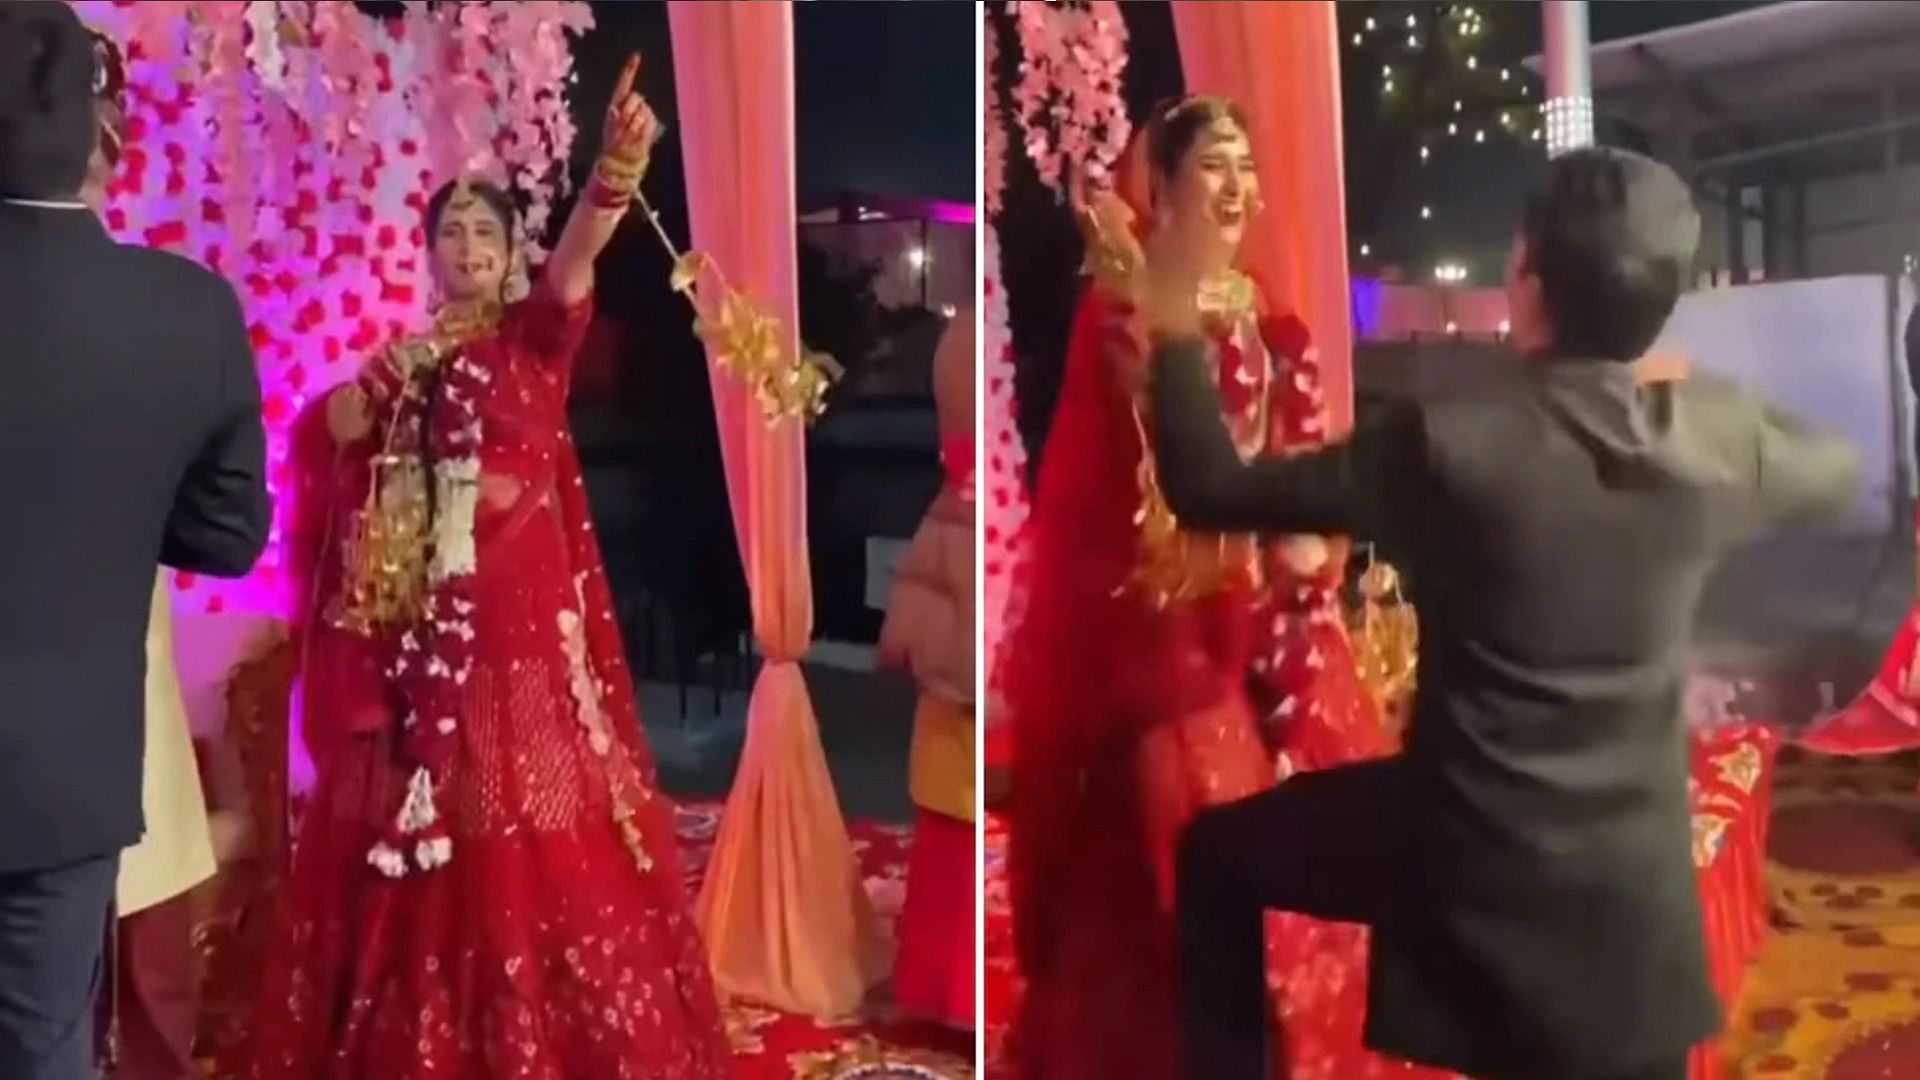 bride started dancing vigorously on the stage leaving the groom video going viral on internet